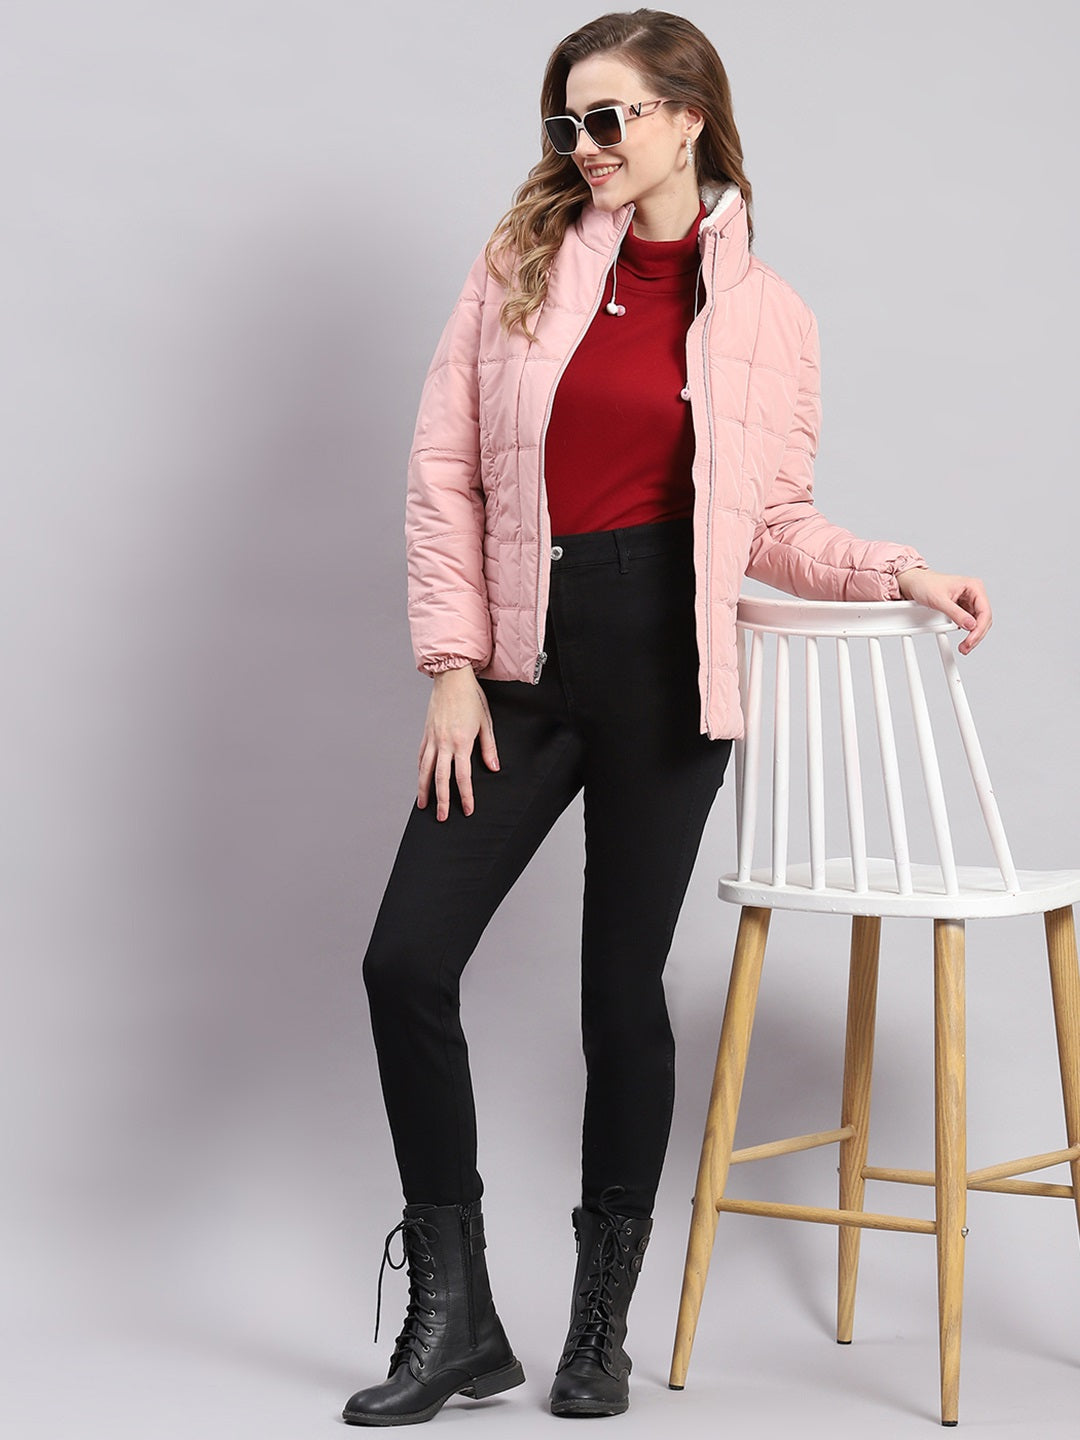 Women Peach Solid Stand Collar Full Sleeve Jackets